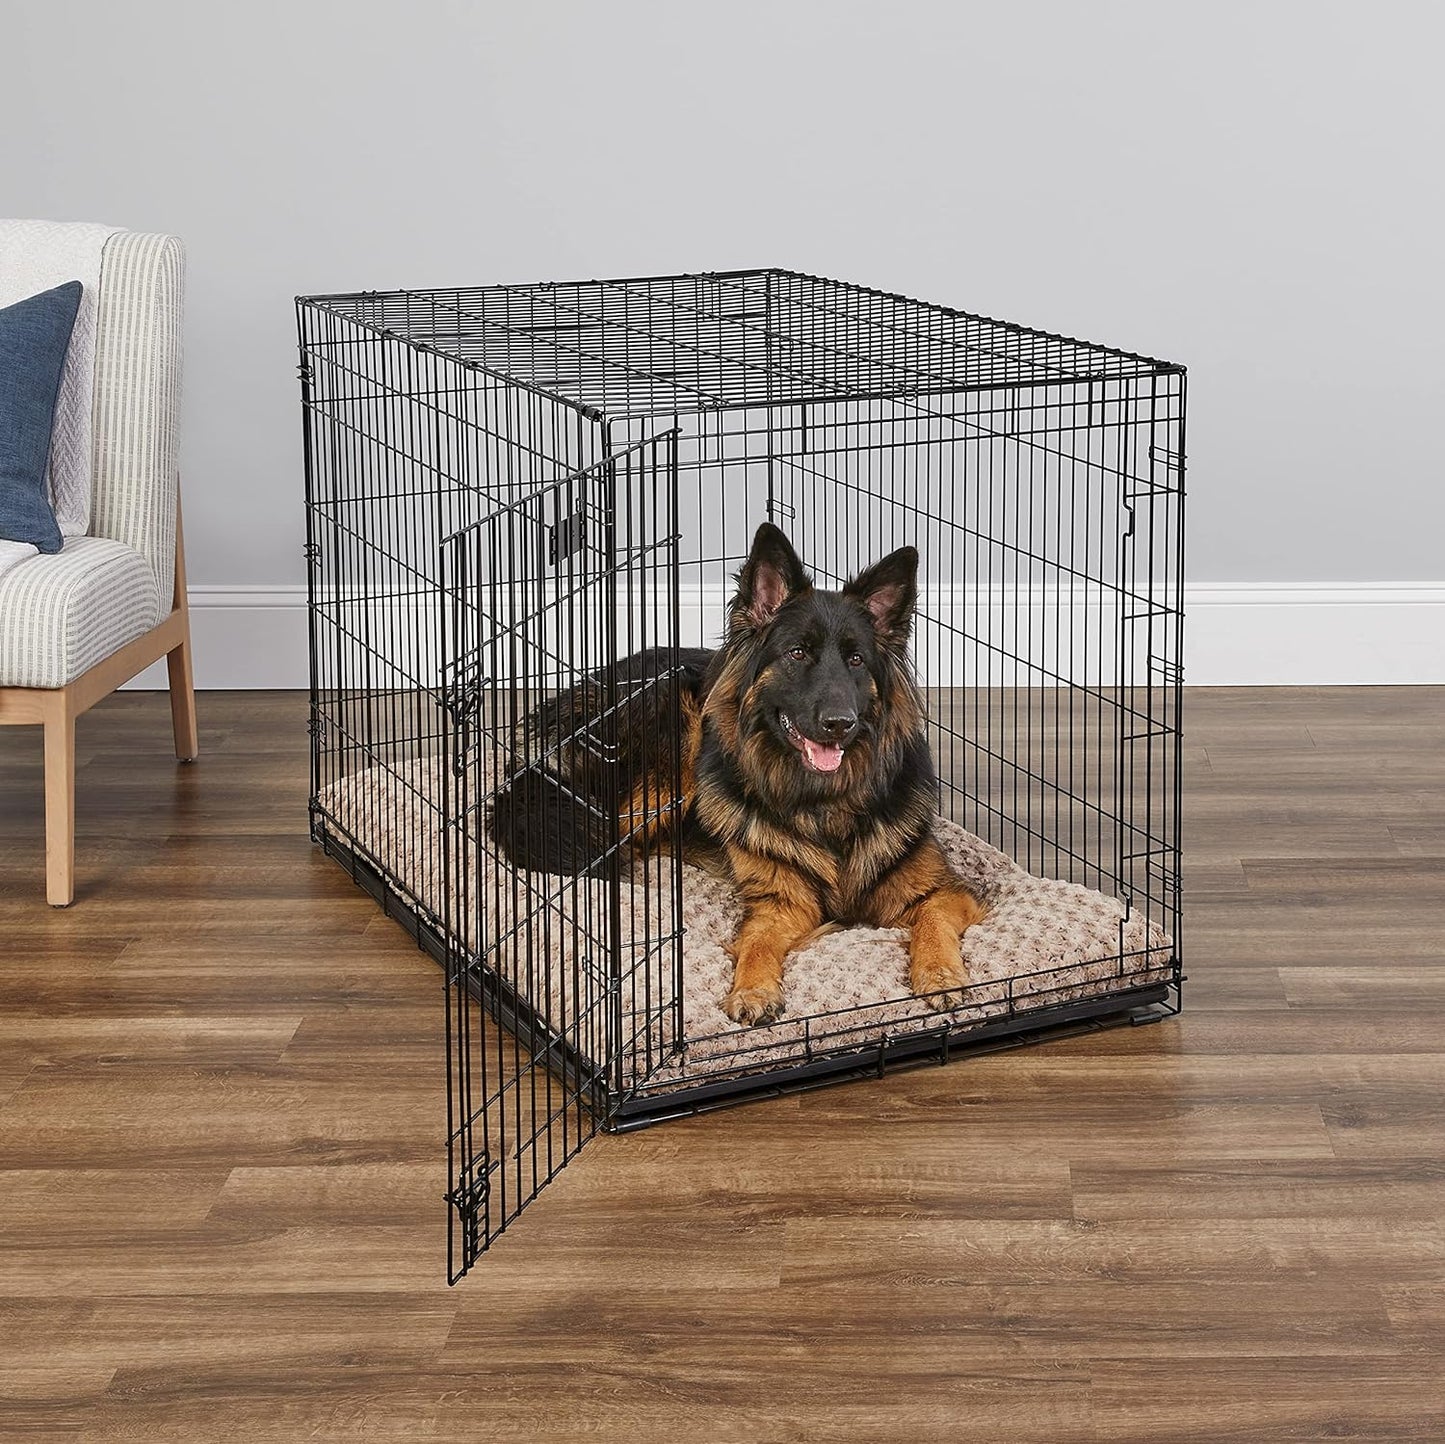 MidWest Homes for Pets Newly Enhanced Single Door iCrate Dog Crate, Includes Leak-Proof Pan, Floor Protecting Feet, Divider Panel & New Patented Features